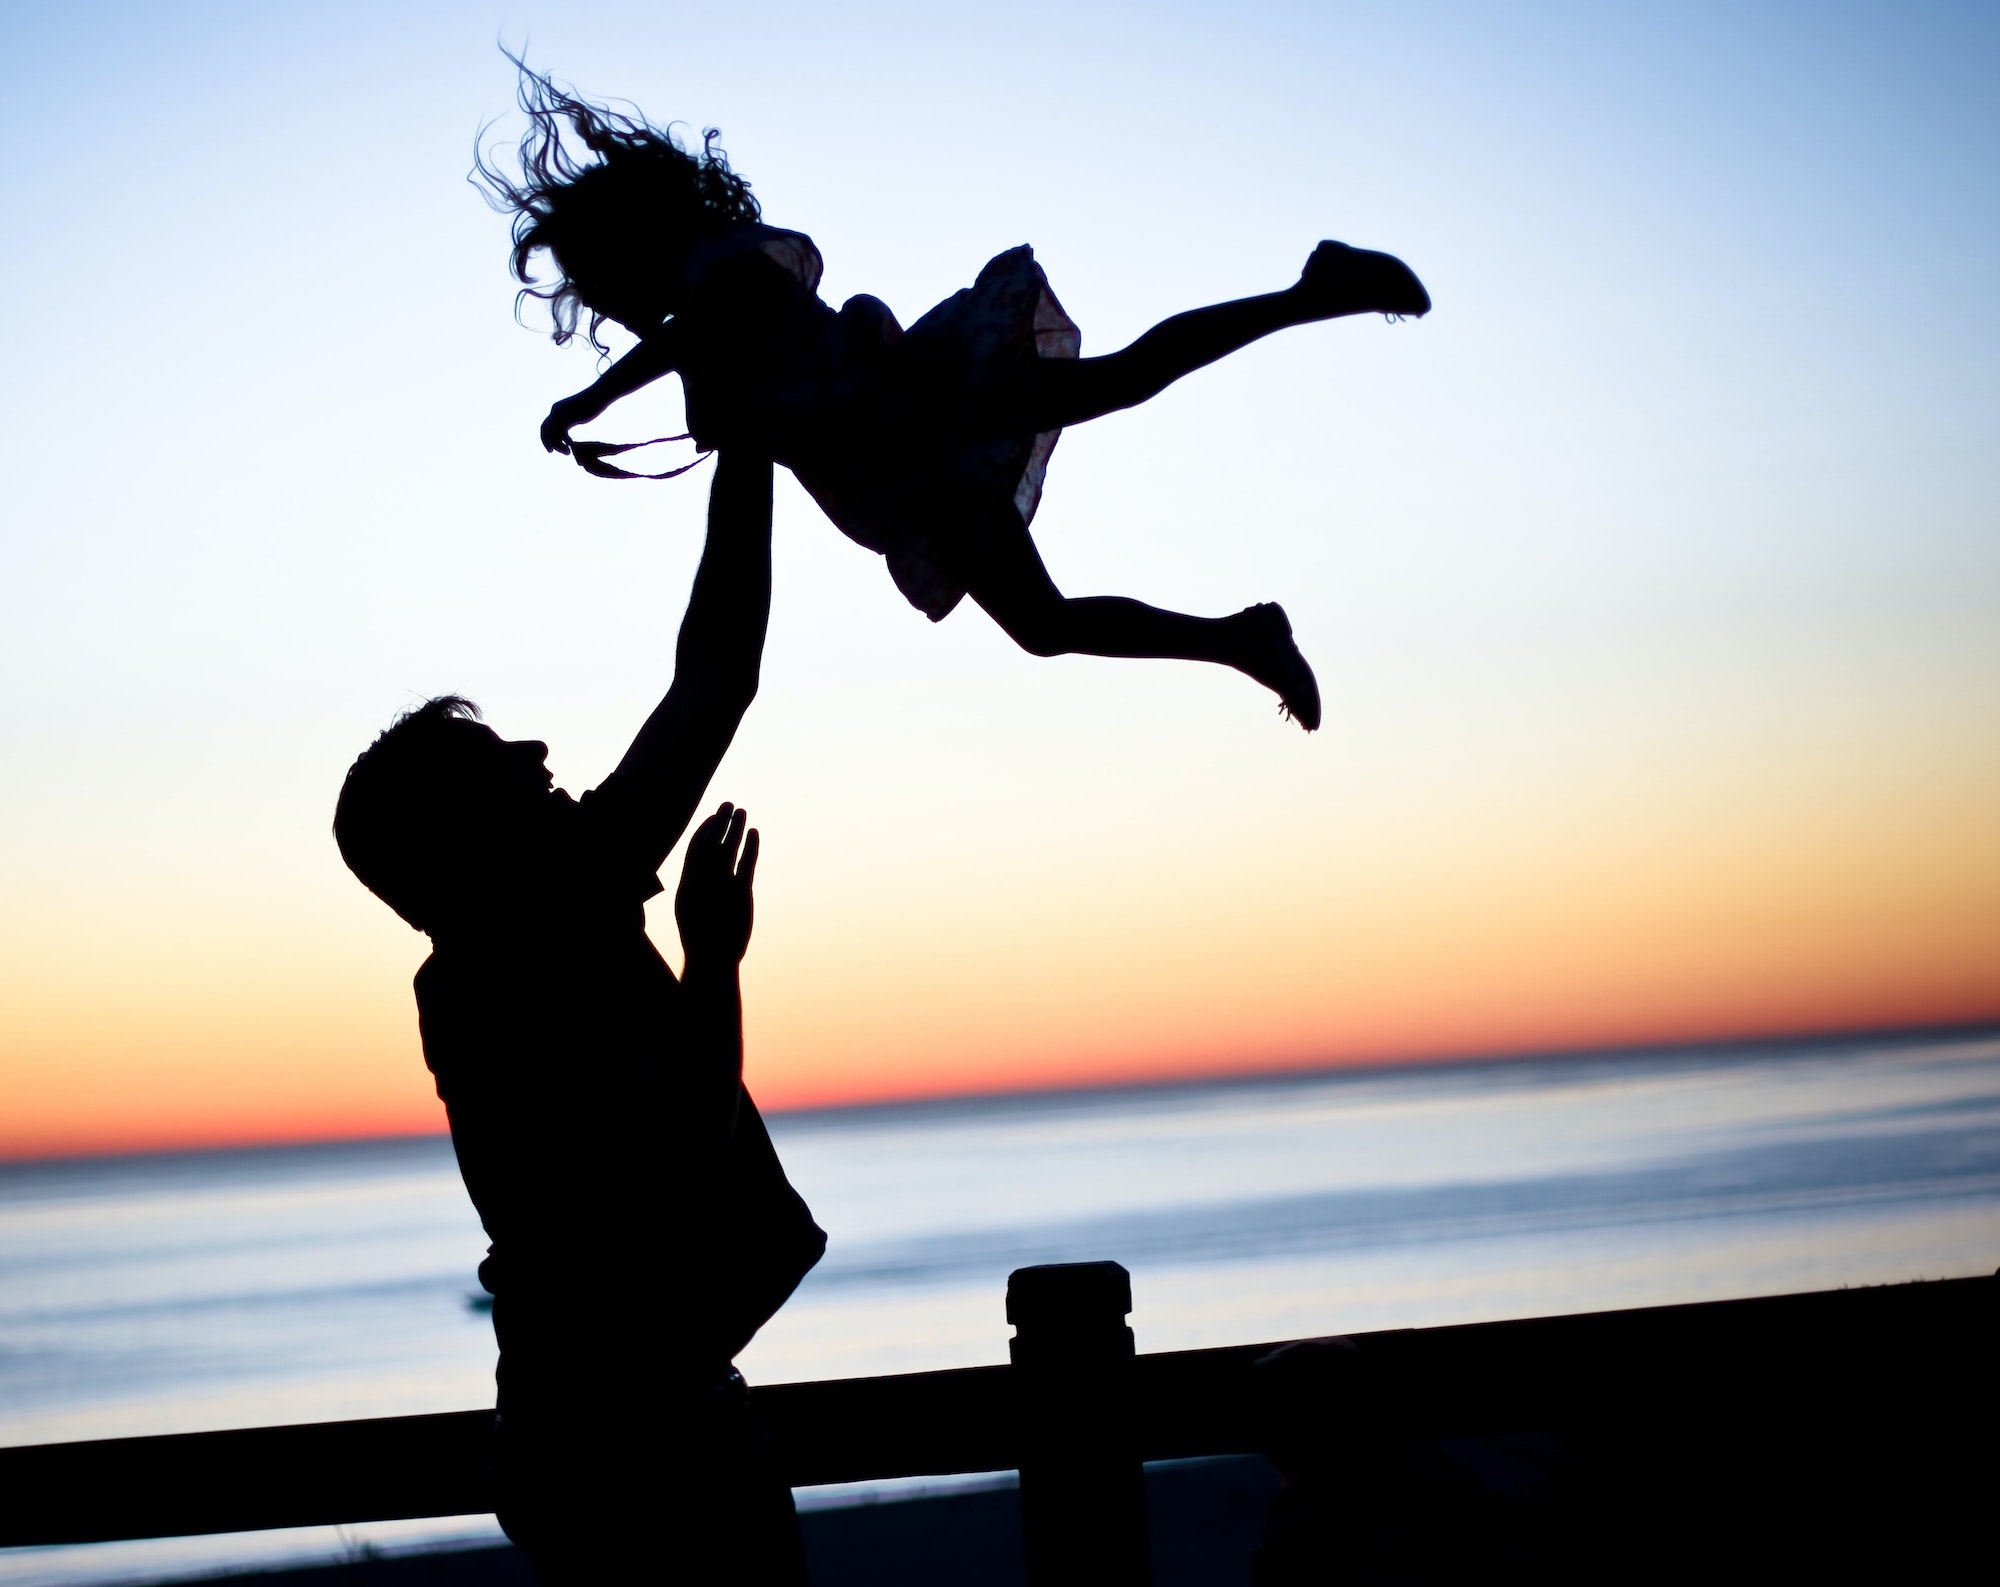 A father tosses his kid in the air playfully at sunset at the beach.